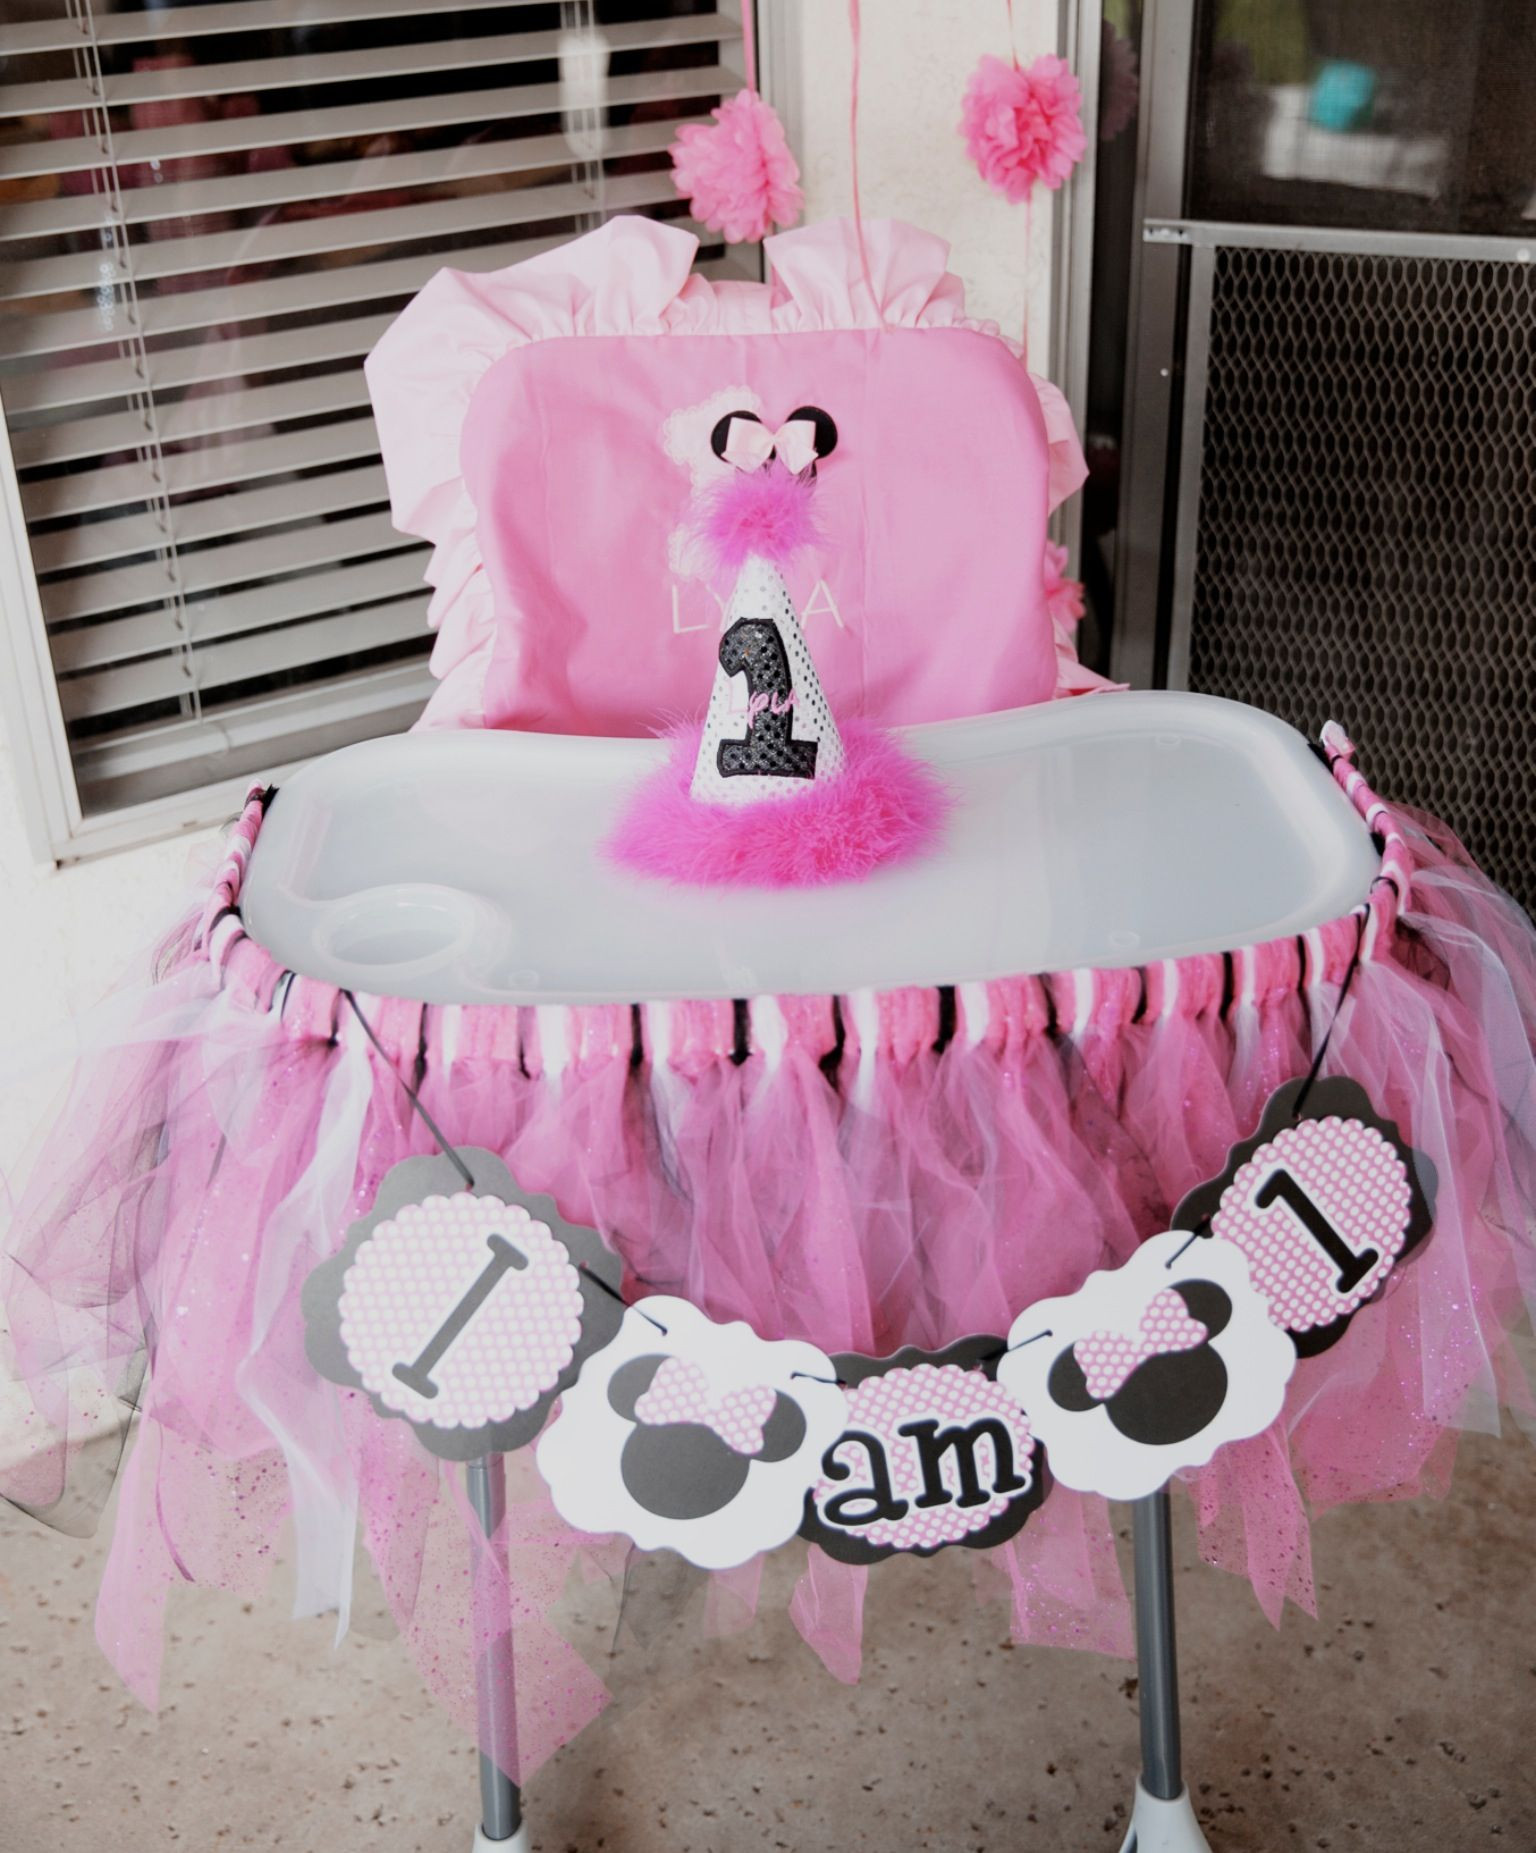 Minnie Mouse Ideas For 1st Birthday Party
 Minnie Mouse high chair I am one first birthday Minnie